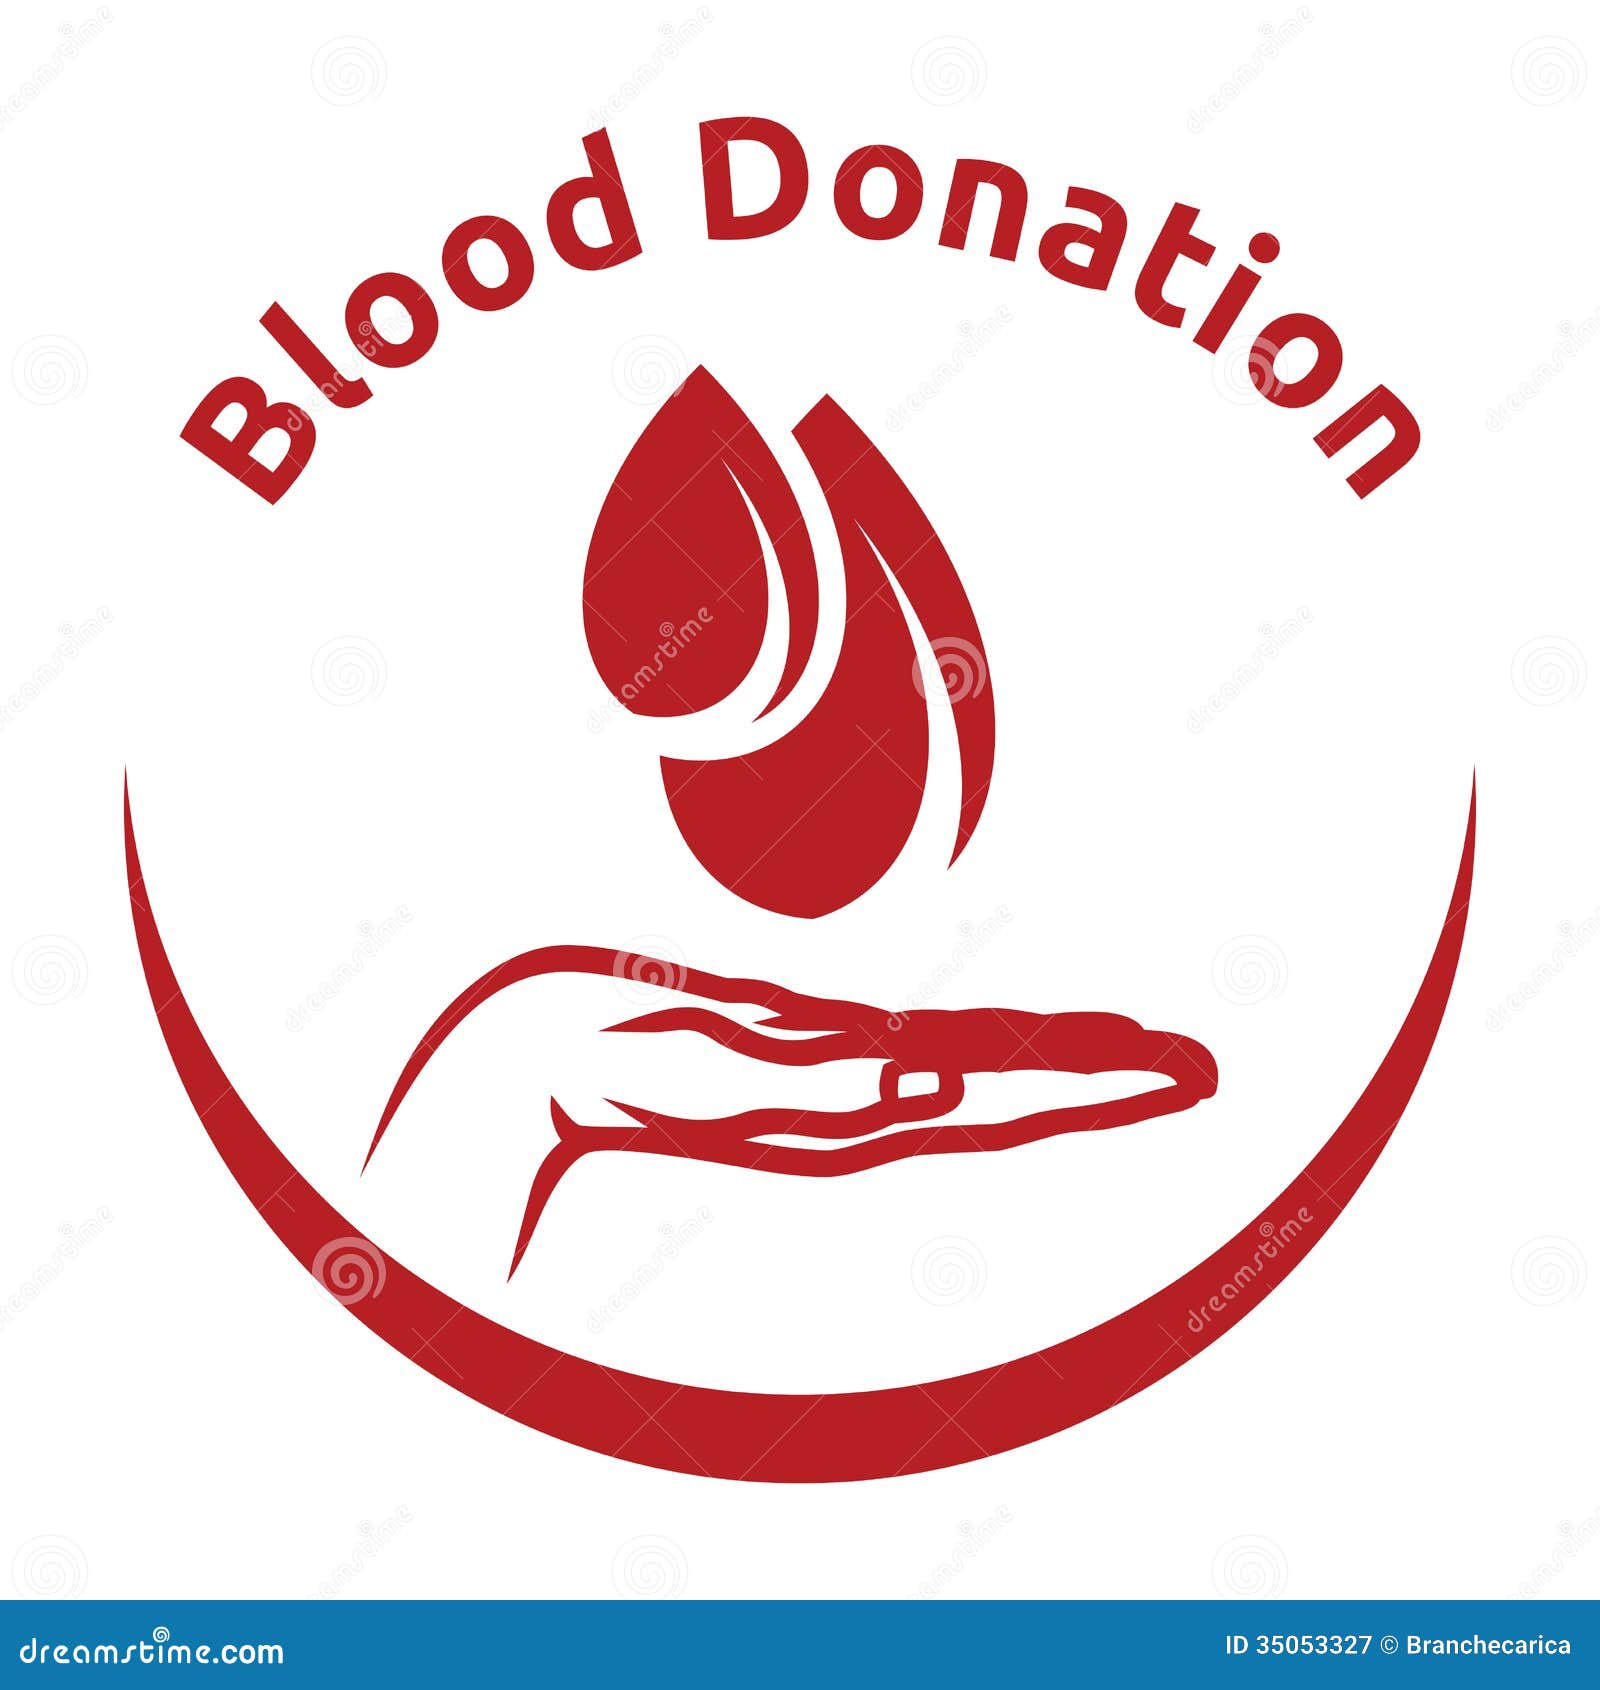 donate blood clipart free - photo #41